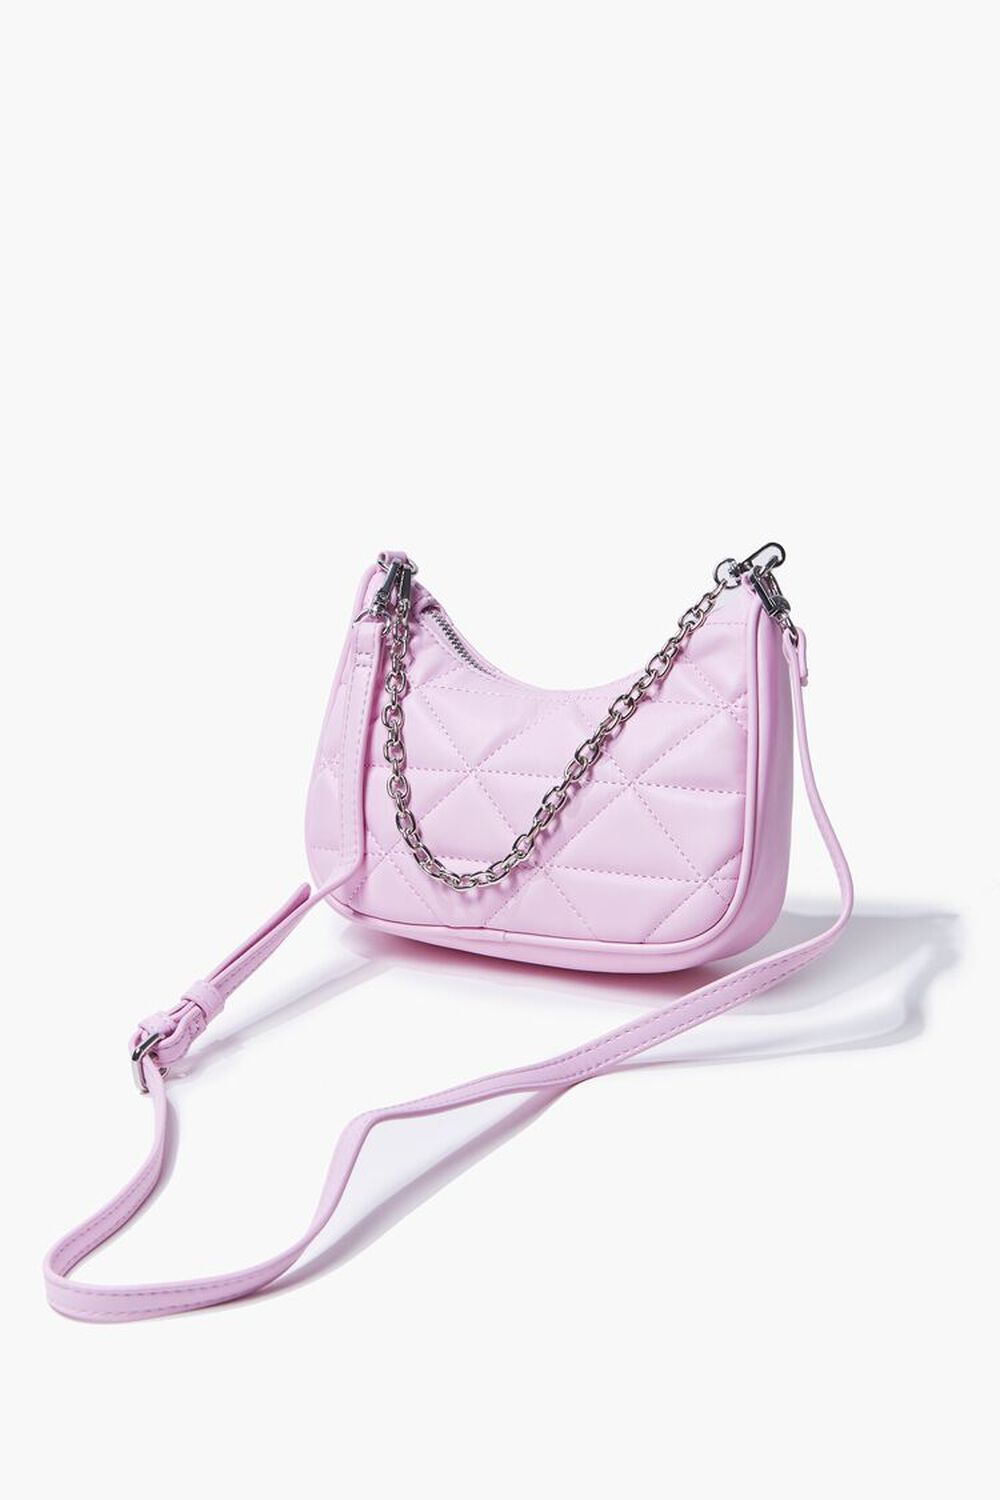 PINK Quilted Crossbody Bag, image 1